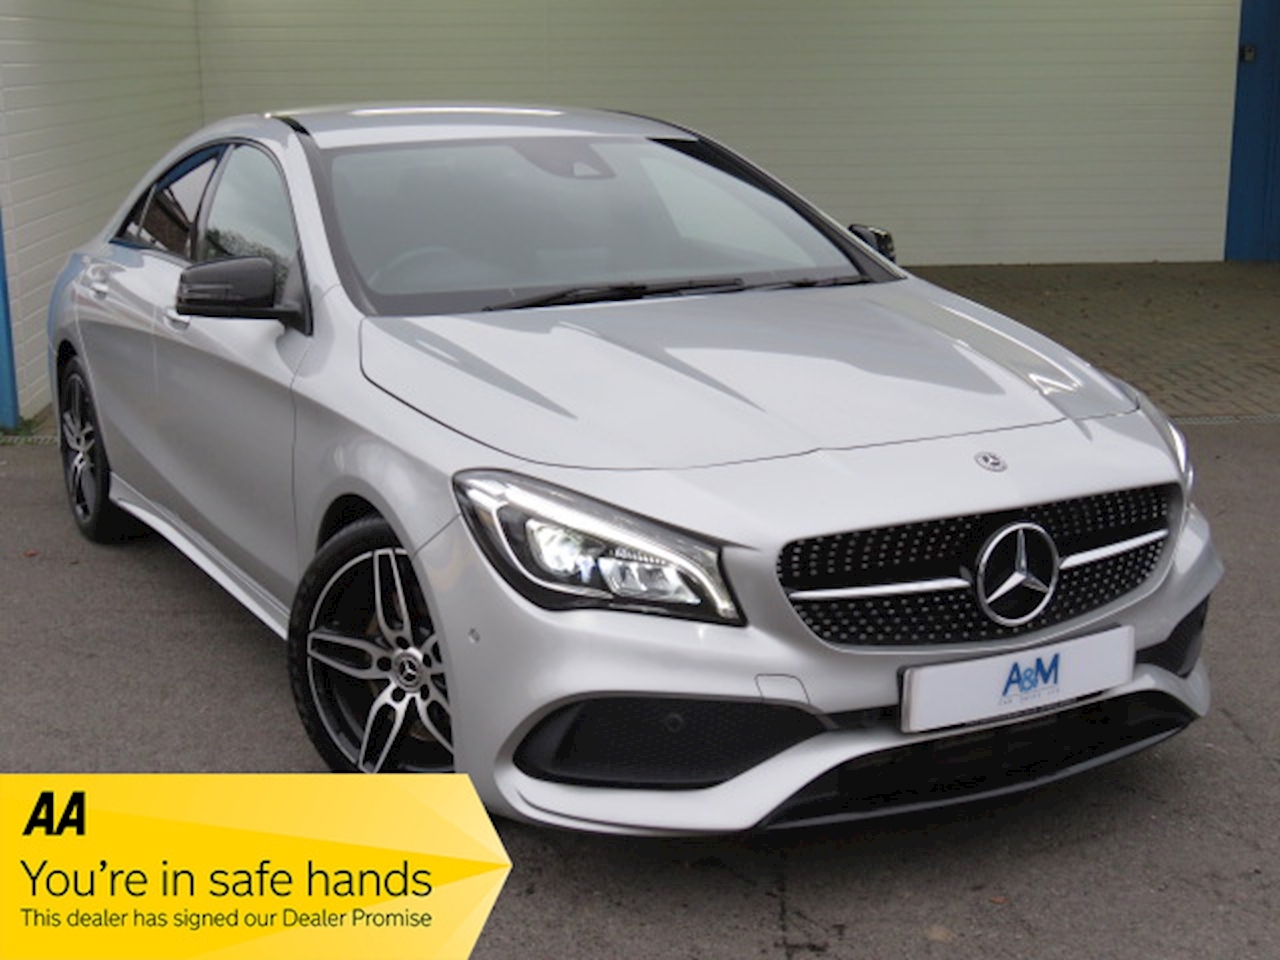 CLA Class AMG Line Coupe 2.1 7G-DCT Diesel